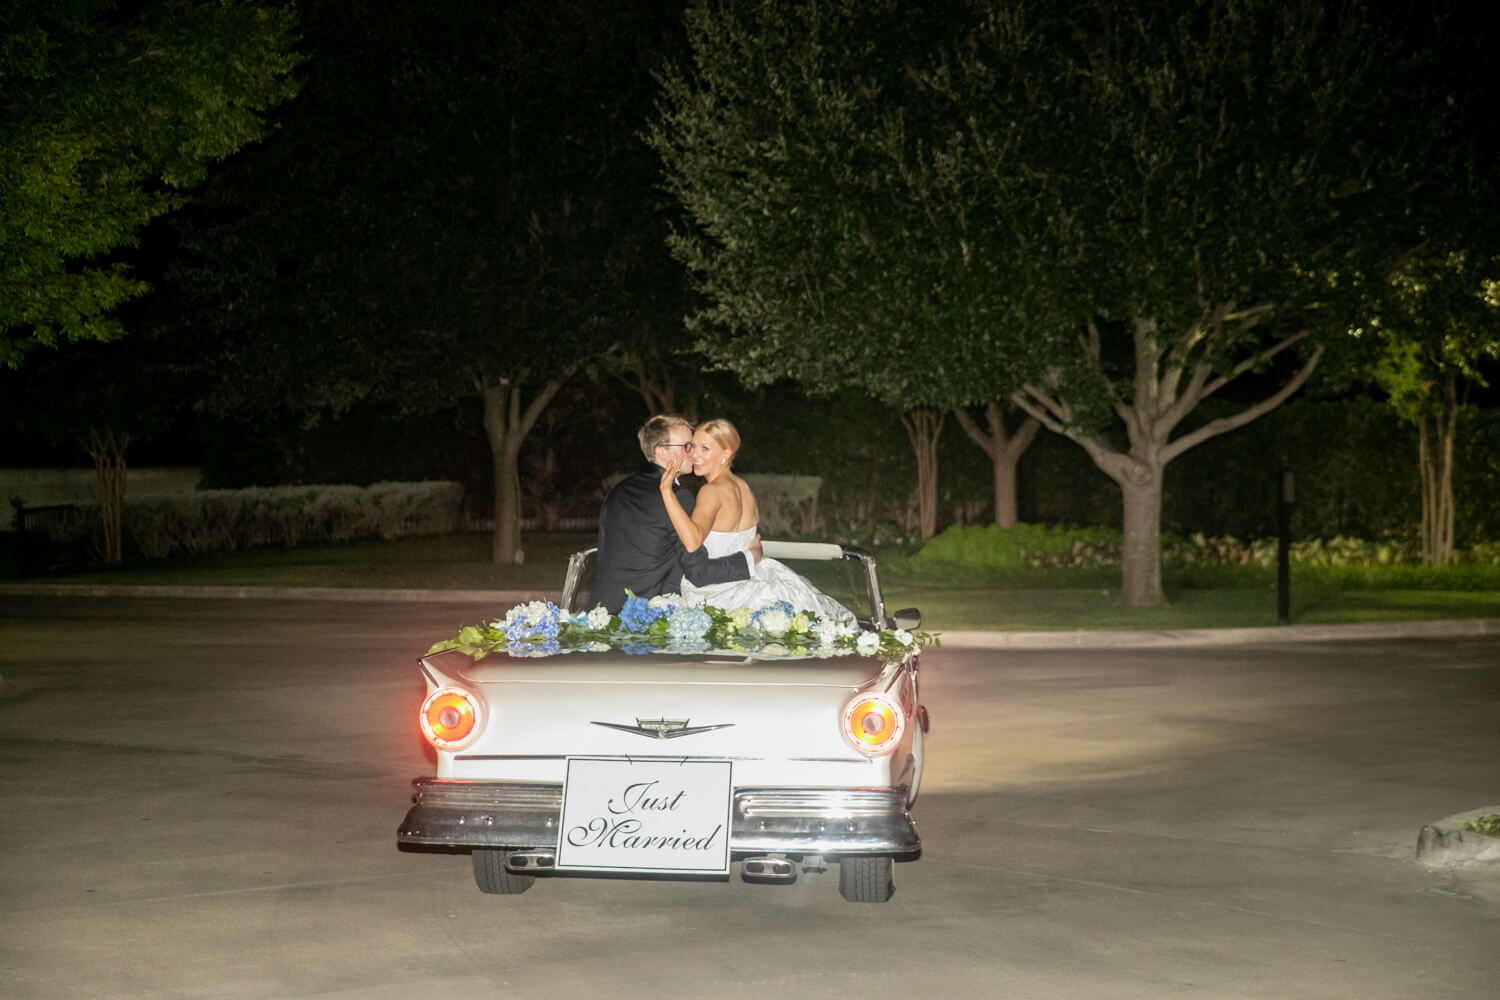 Saluti Scottsdale for Julie Price and Alex Barnes - John Cain Photography